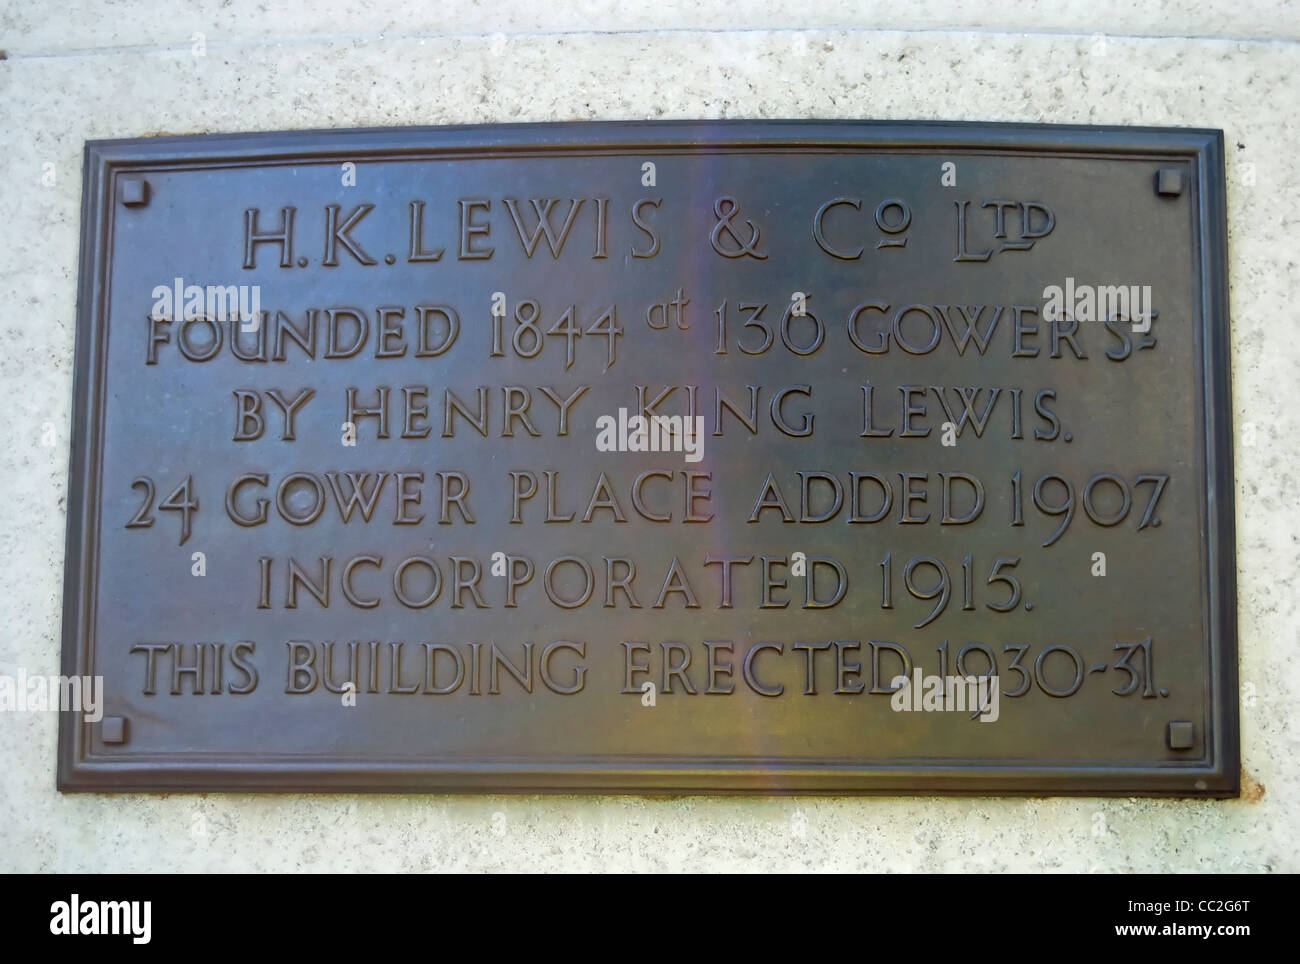 plaque marking the former site of h.k.lewis, a noted medical bookshop on gower street, london, england Stock Photo